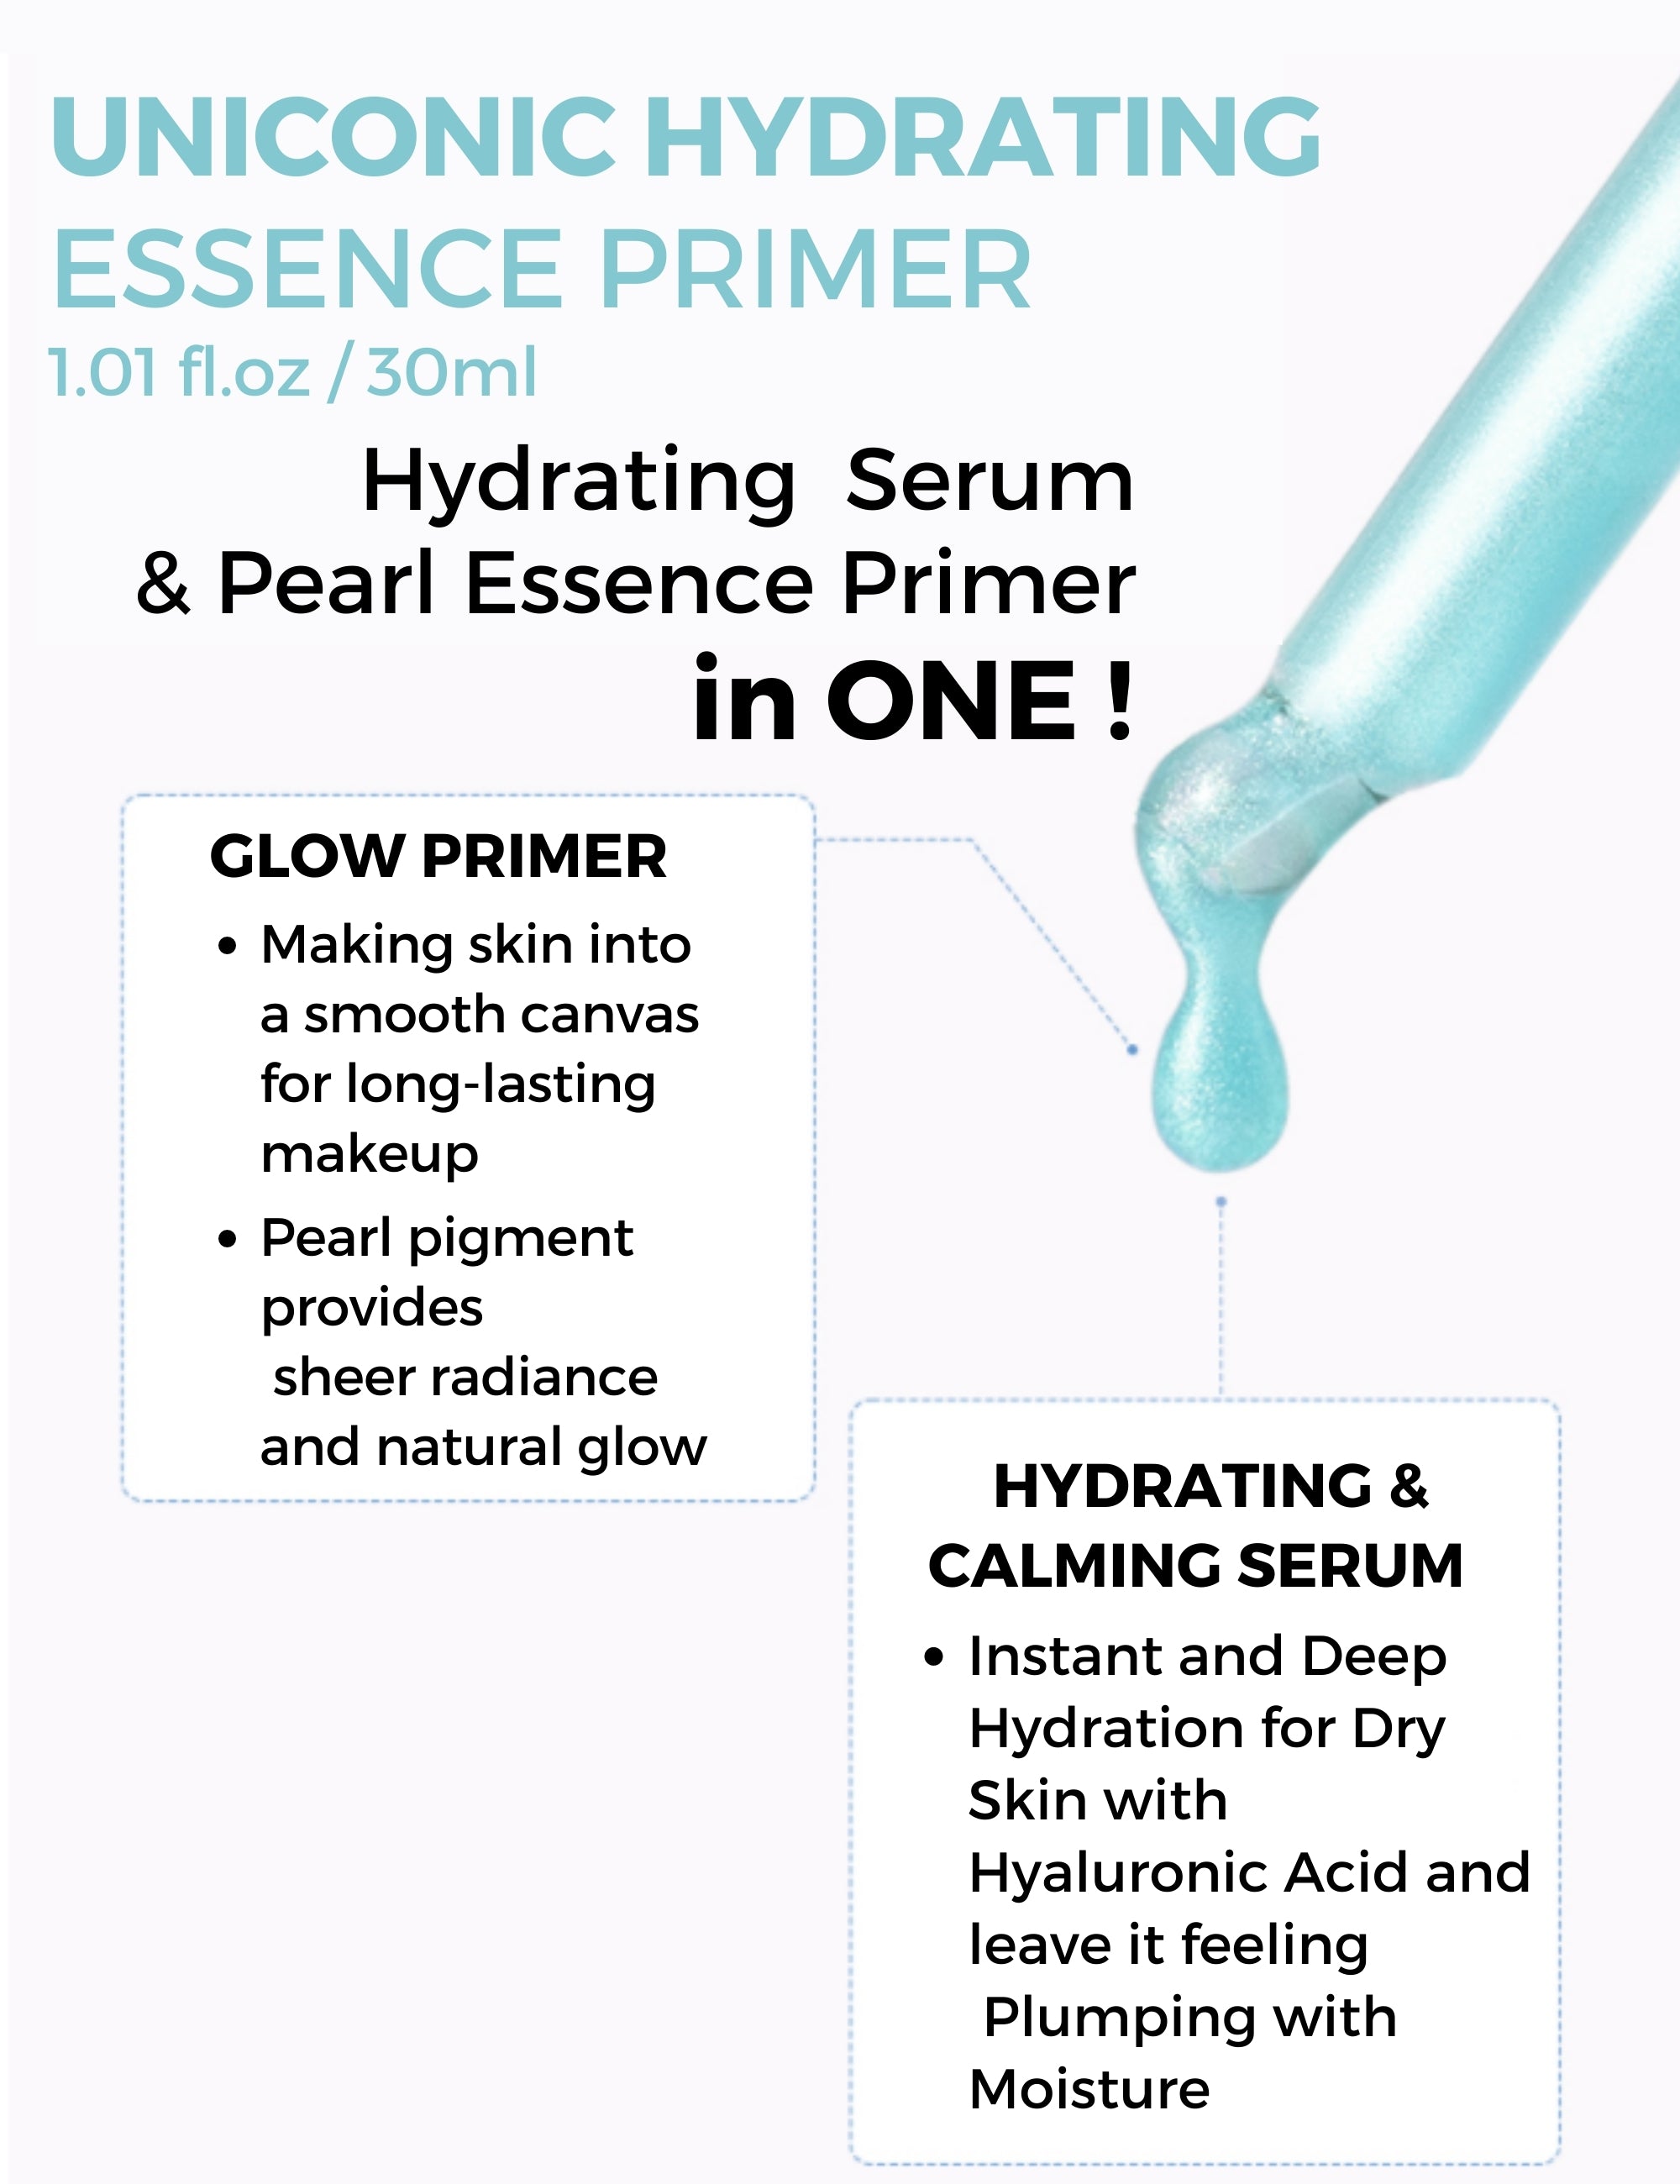 UNICONIC Hydrating Glow Face Serum to Primer for Dry Skin 1.01fl.oz (30ml) - SELF BEAUTY